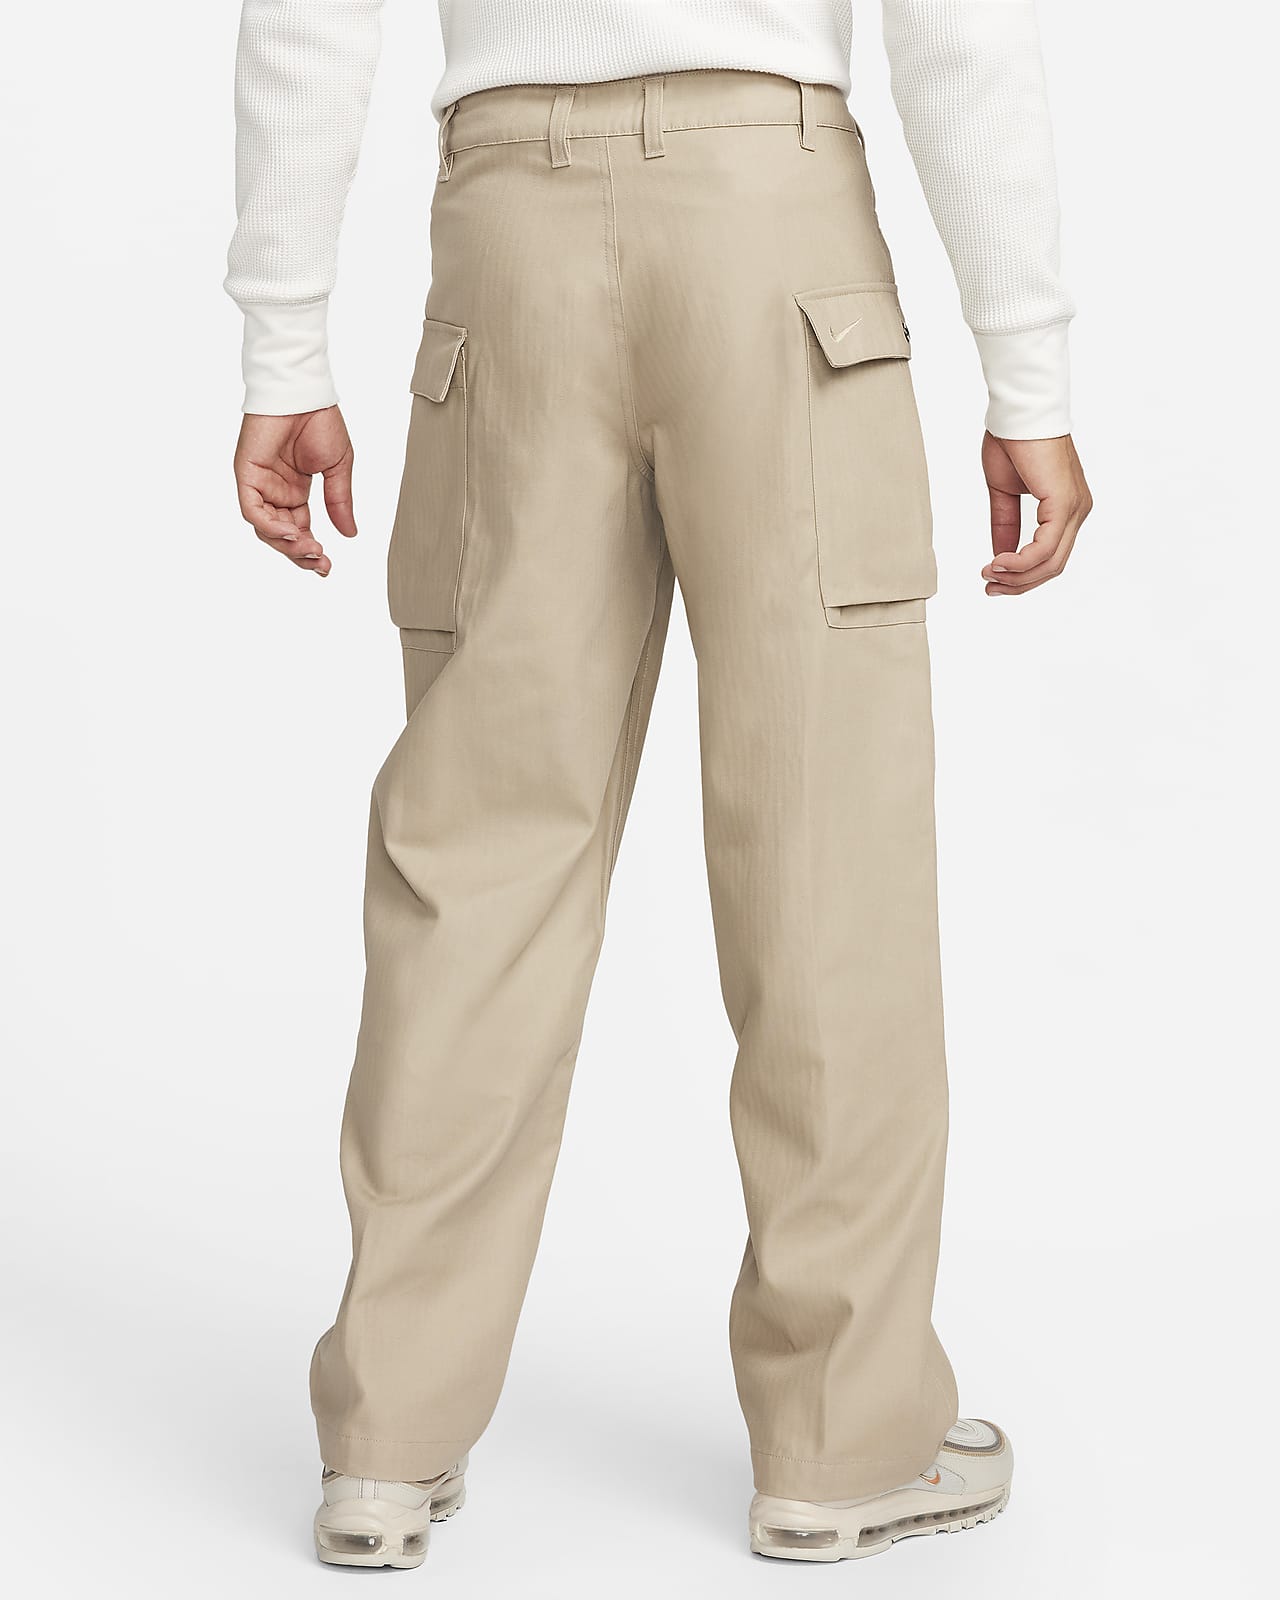 https://static.nike.com/a/images/t_PDP_1280_v1/f_auto,q_auto:eco/89ee7314-0560-49bc-9f7e-f141d1f058c8/life-cargo-trousers-MTczC2.png